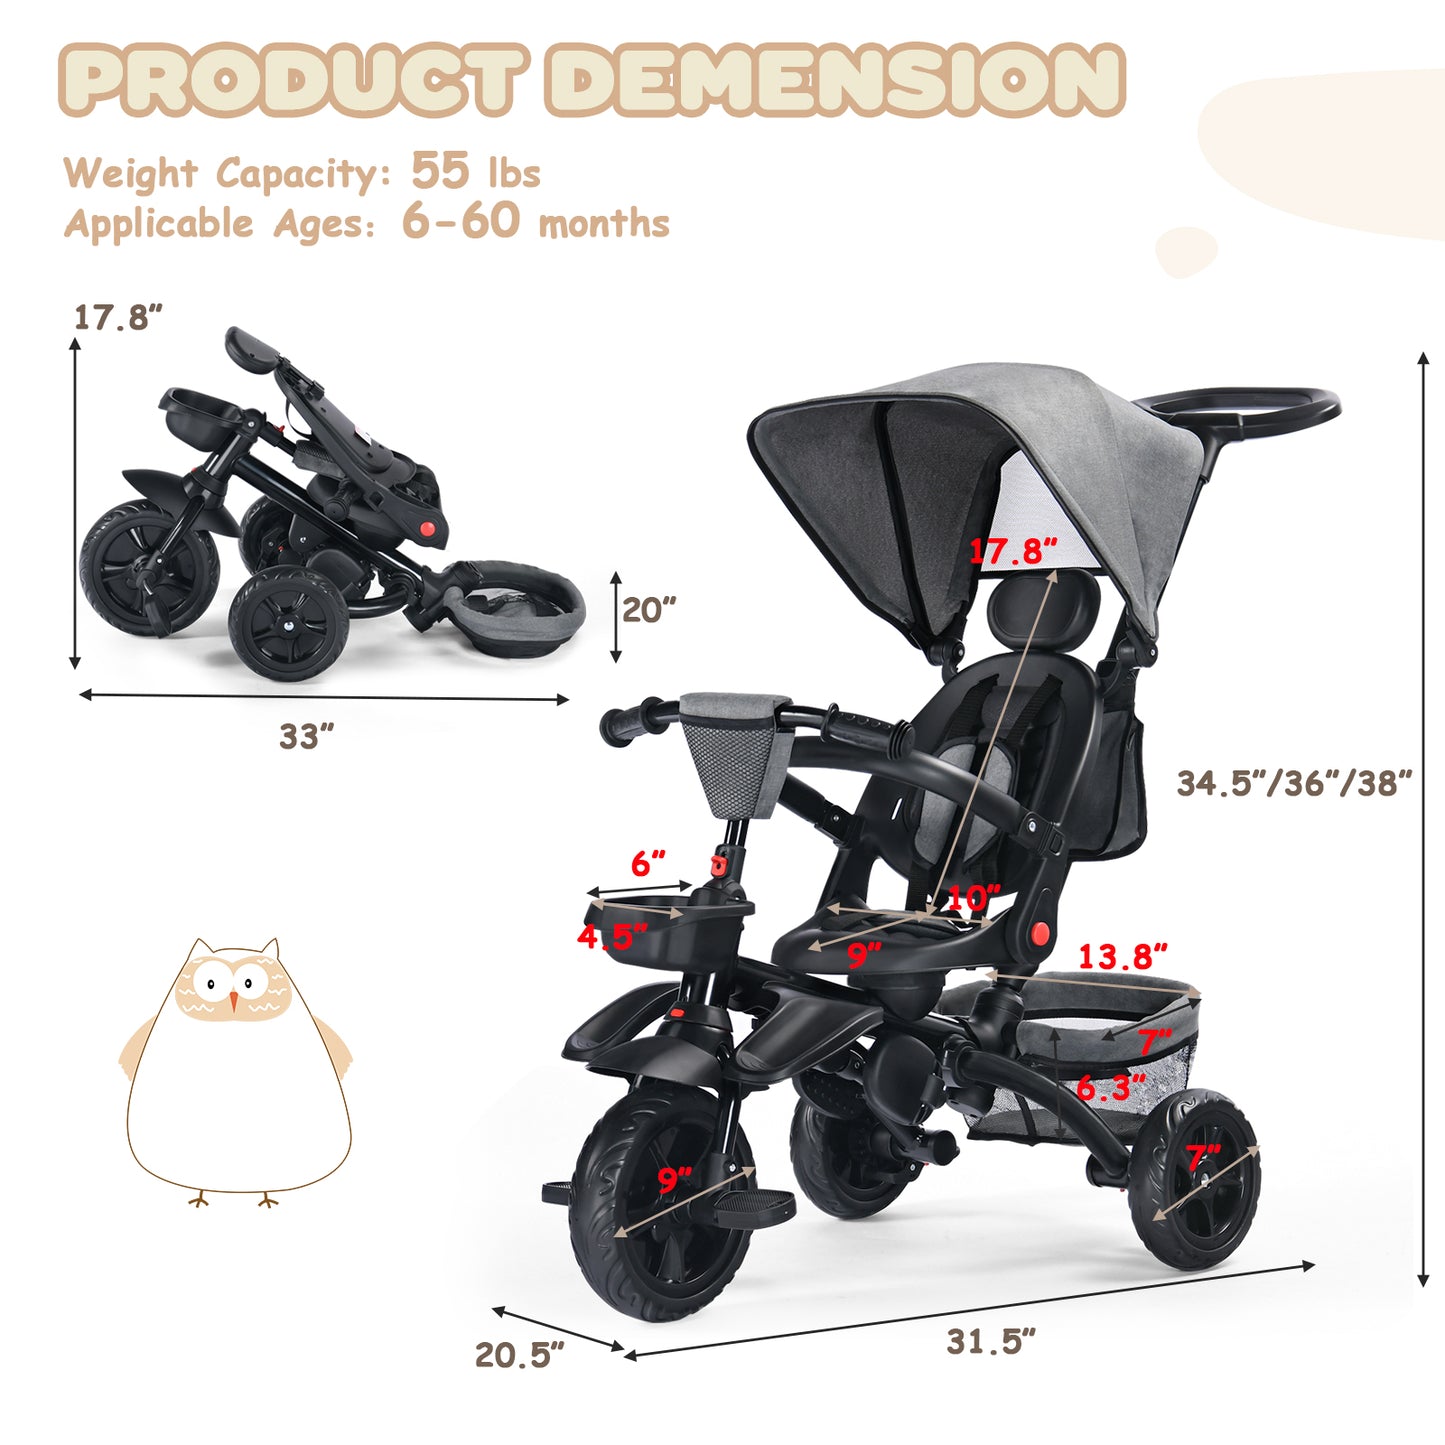 Folding Kids' Tricycle, 8 IN 1 Baby Trike W/Removable Canpoy&Parental Push Rod, Toddler Bike Stroller for Kids 1-5 Years, Grey